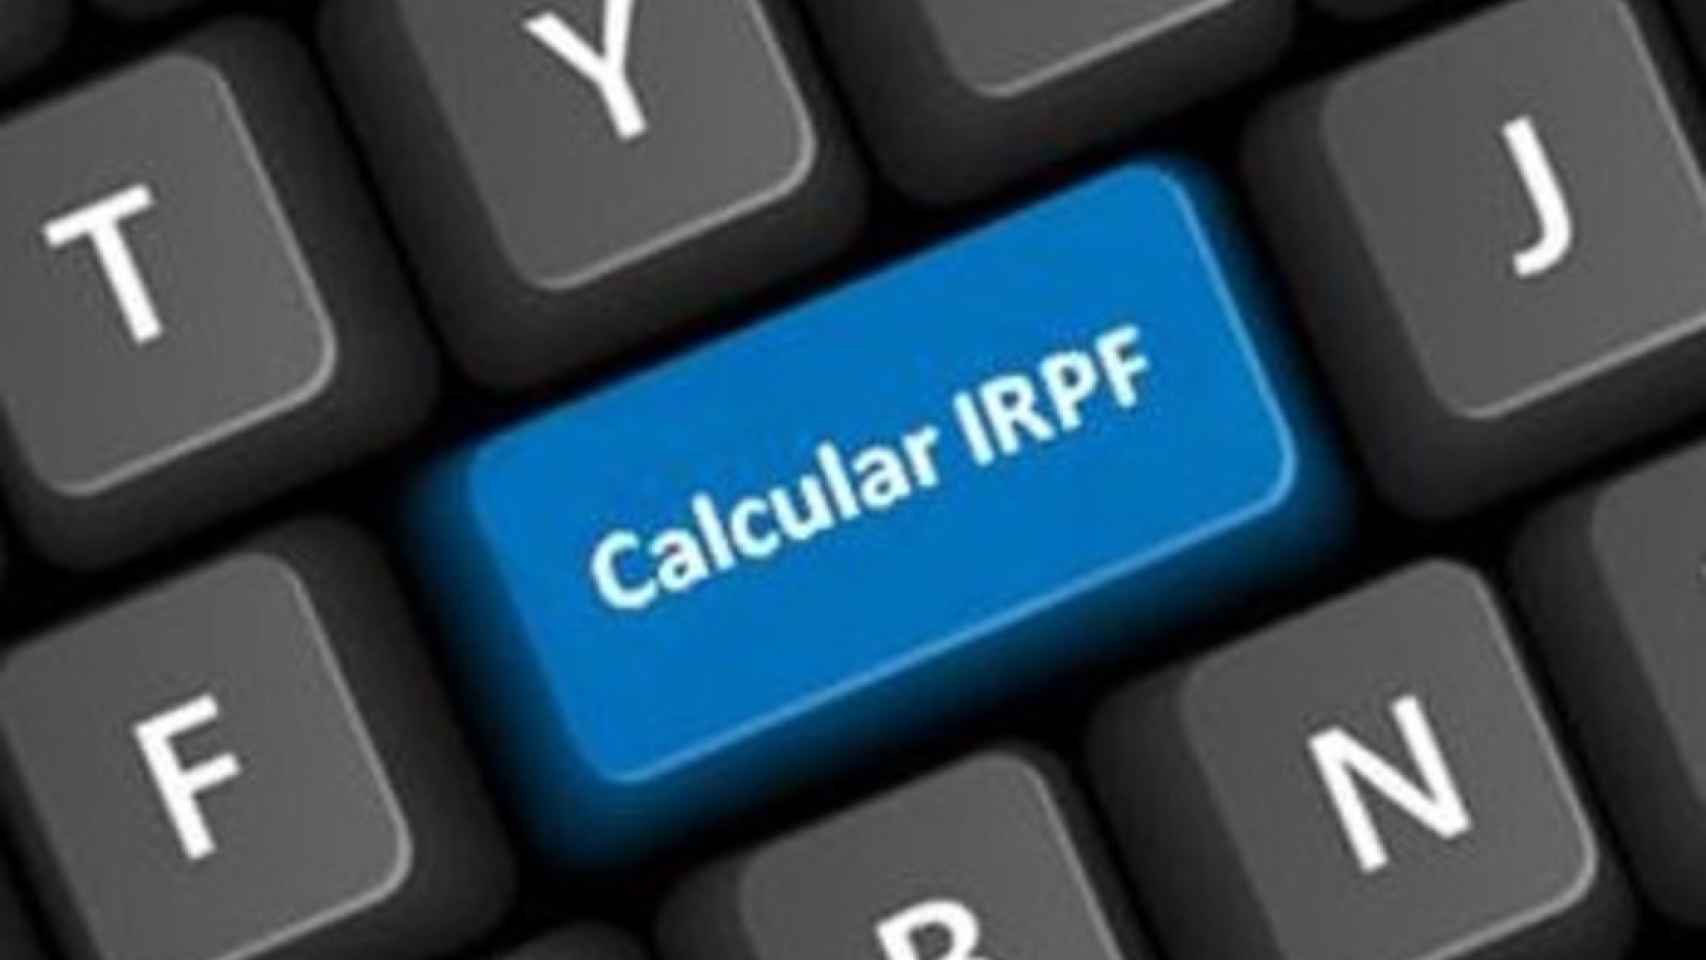 calculairpf